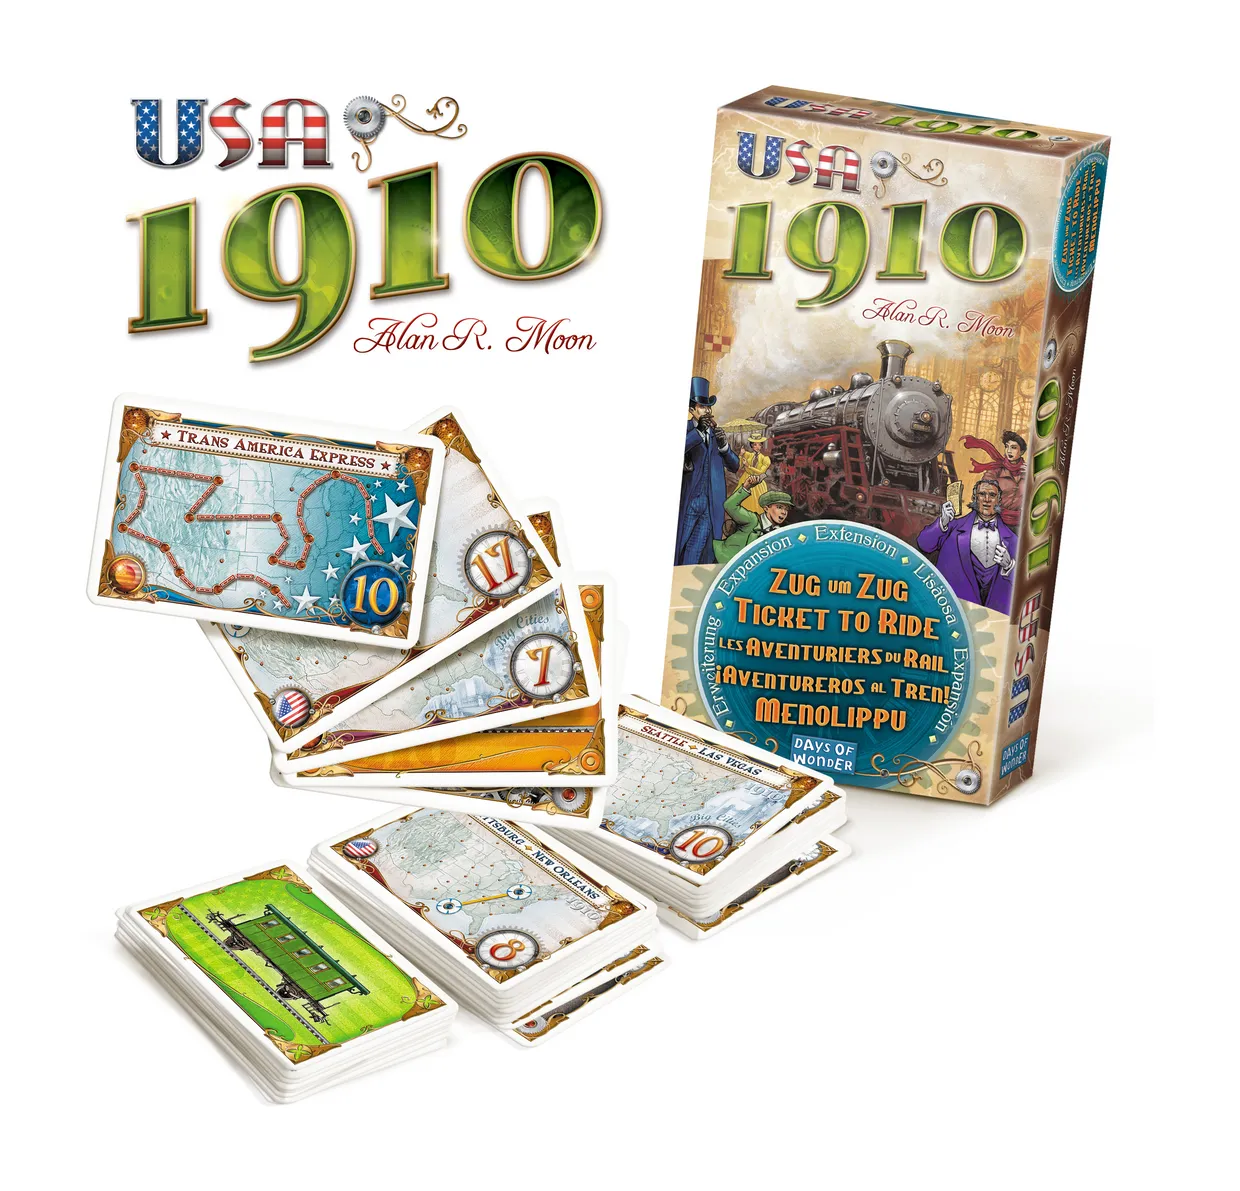 Ticket to Ride - USA 1910 Expansion - Multilingual